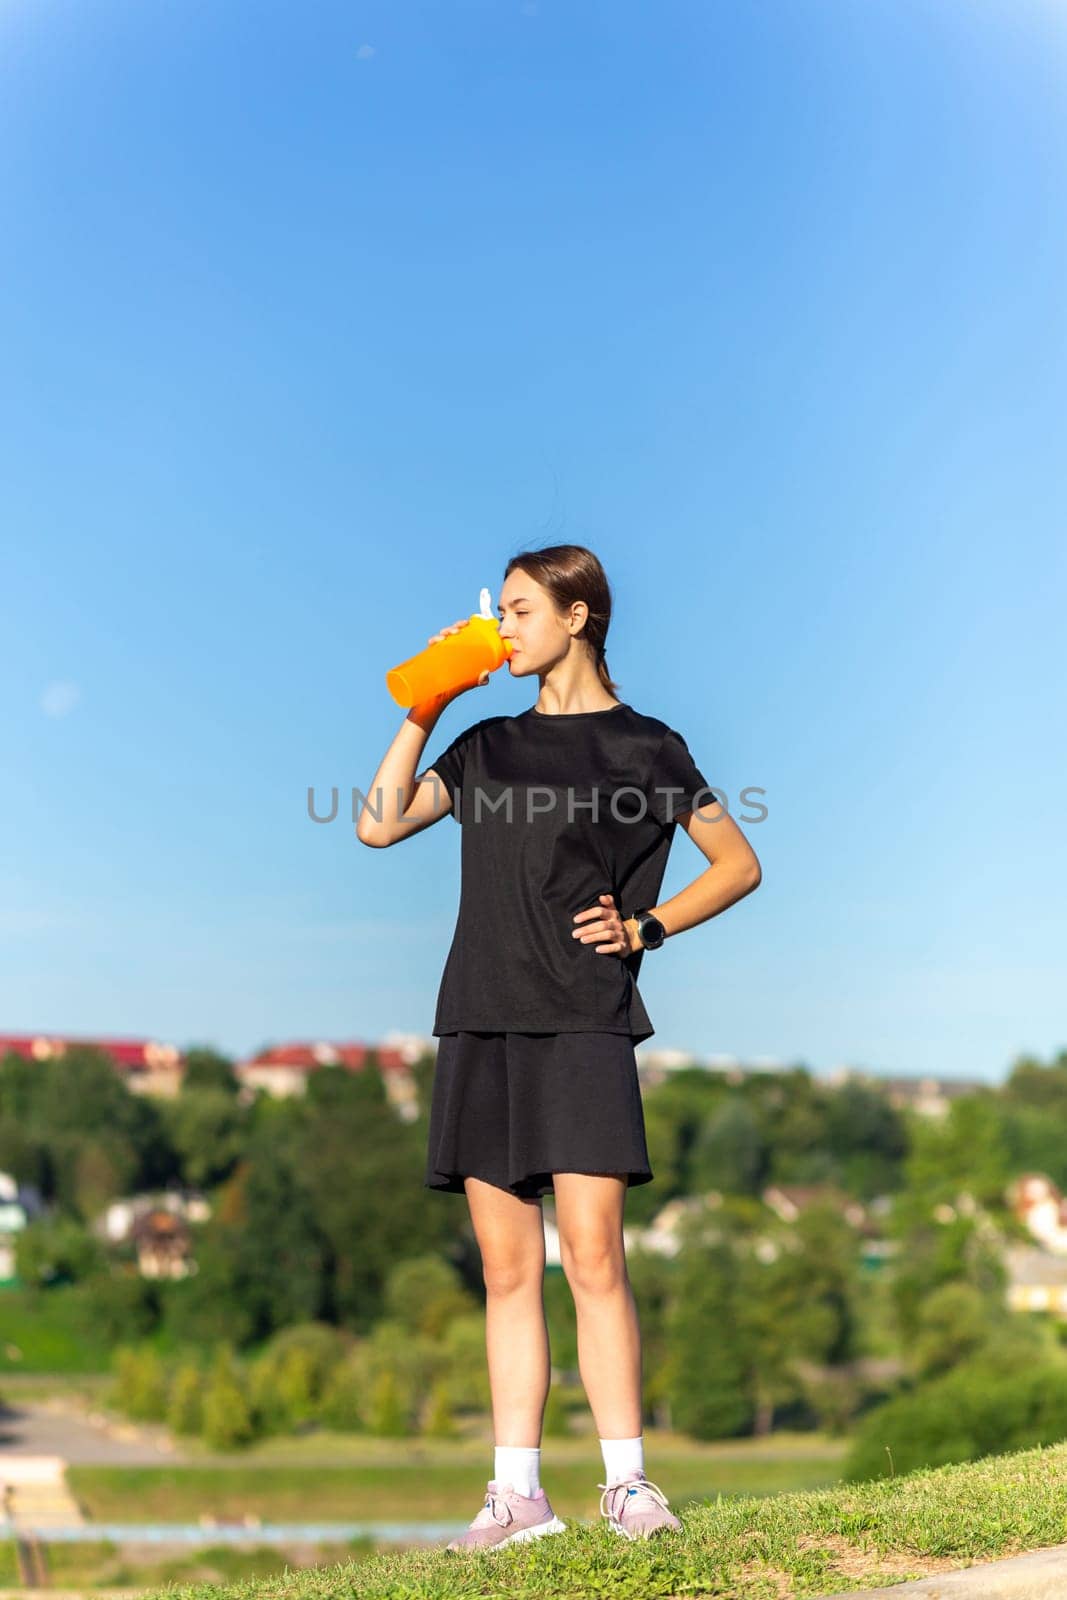 Fit tennage girl runner outdoors holding water bottle. Fitness woman taking a break after running workout.